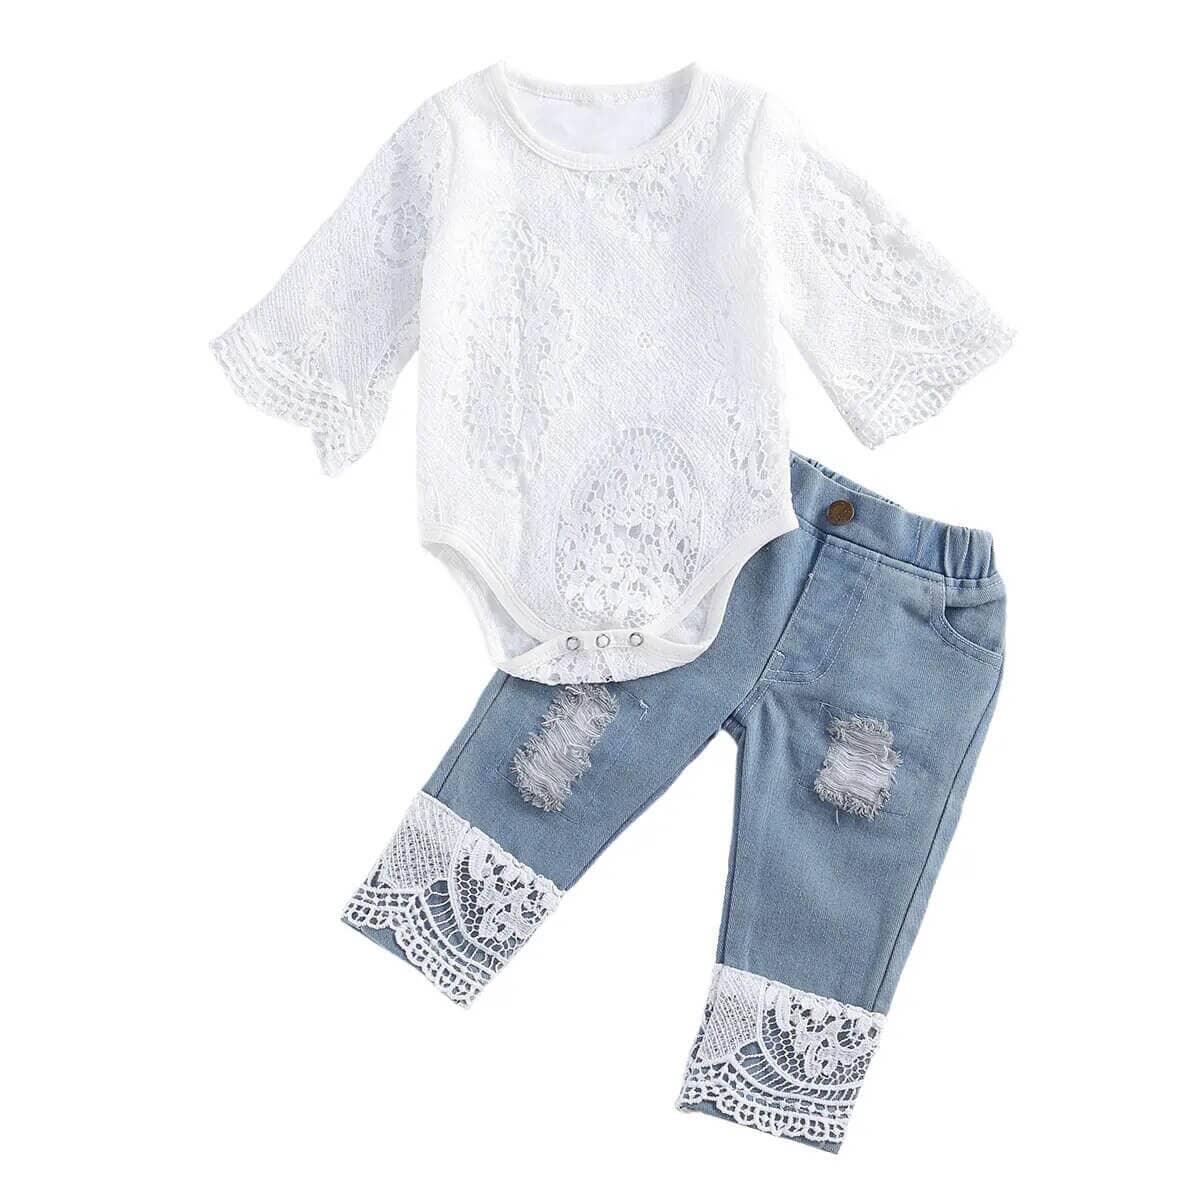 Cotton And Denim Printed Kids Girls Top and Denim Jeans Set, 6-12